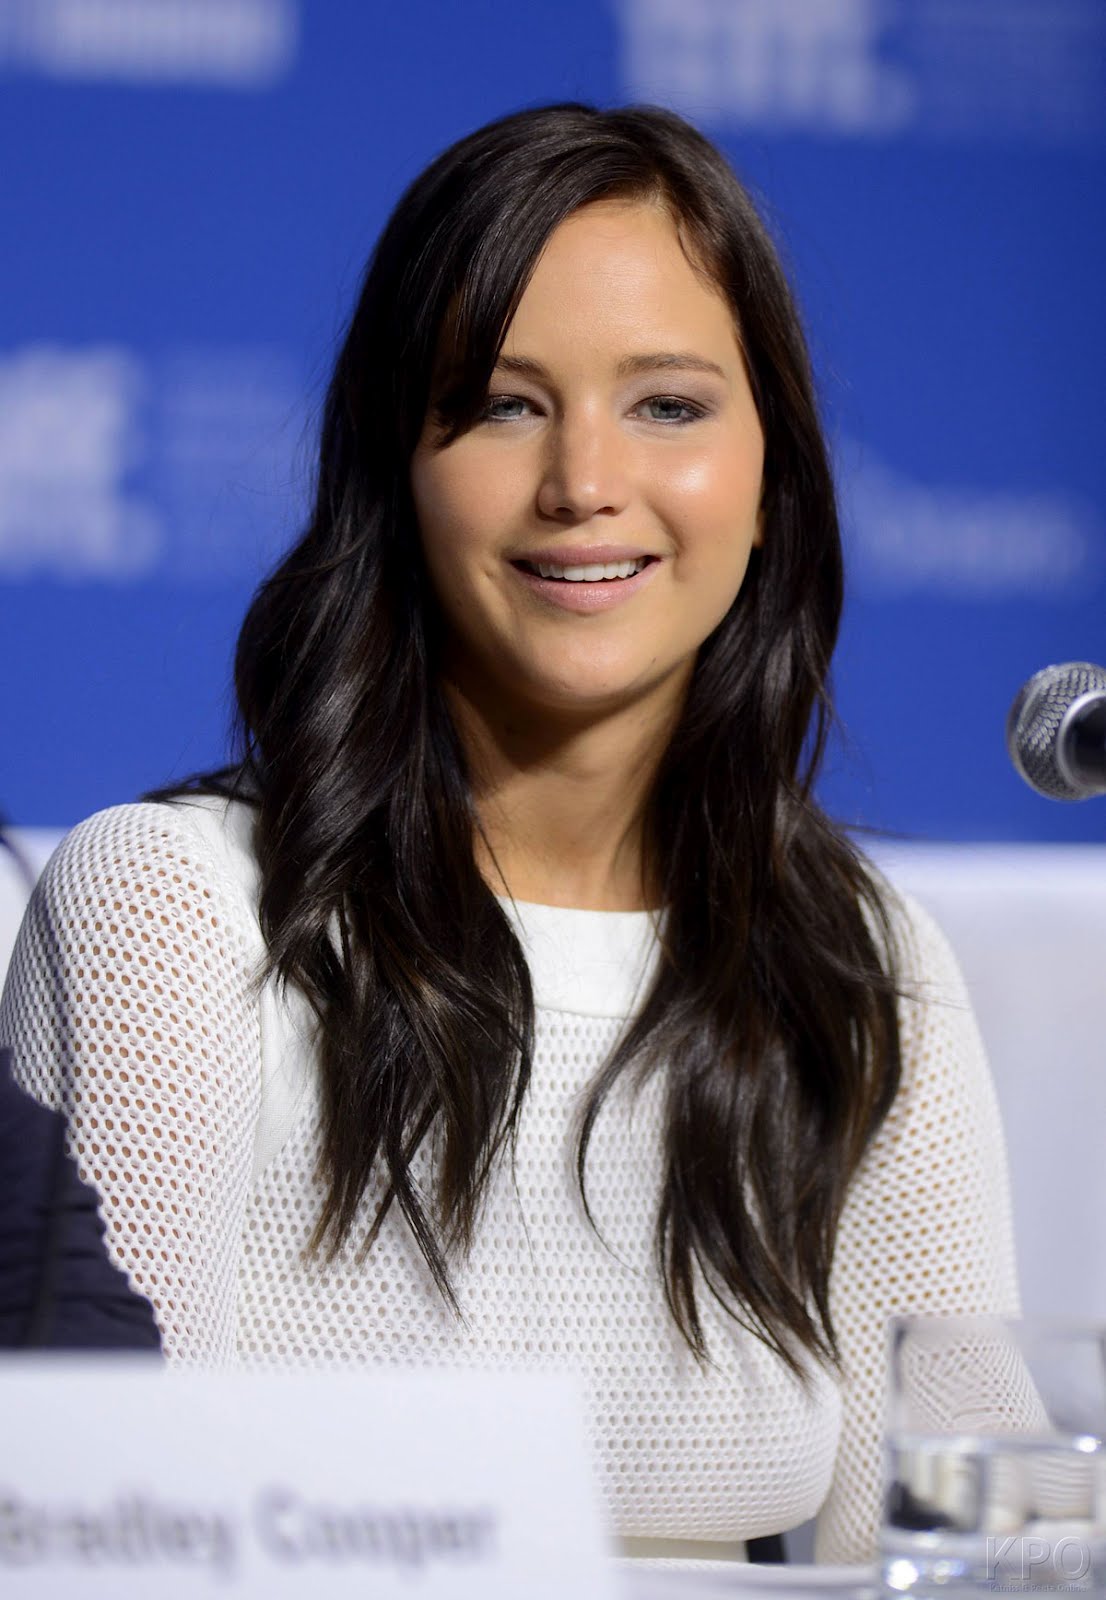 Jennifer Lawrence Hot At The Silver Linings Playbook Event In Toronto ...